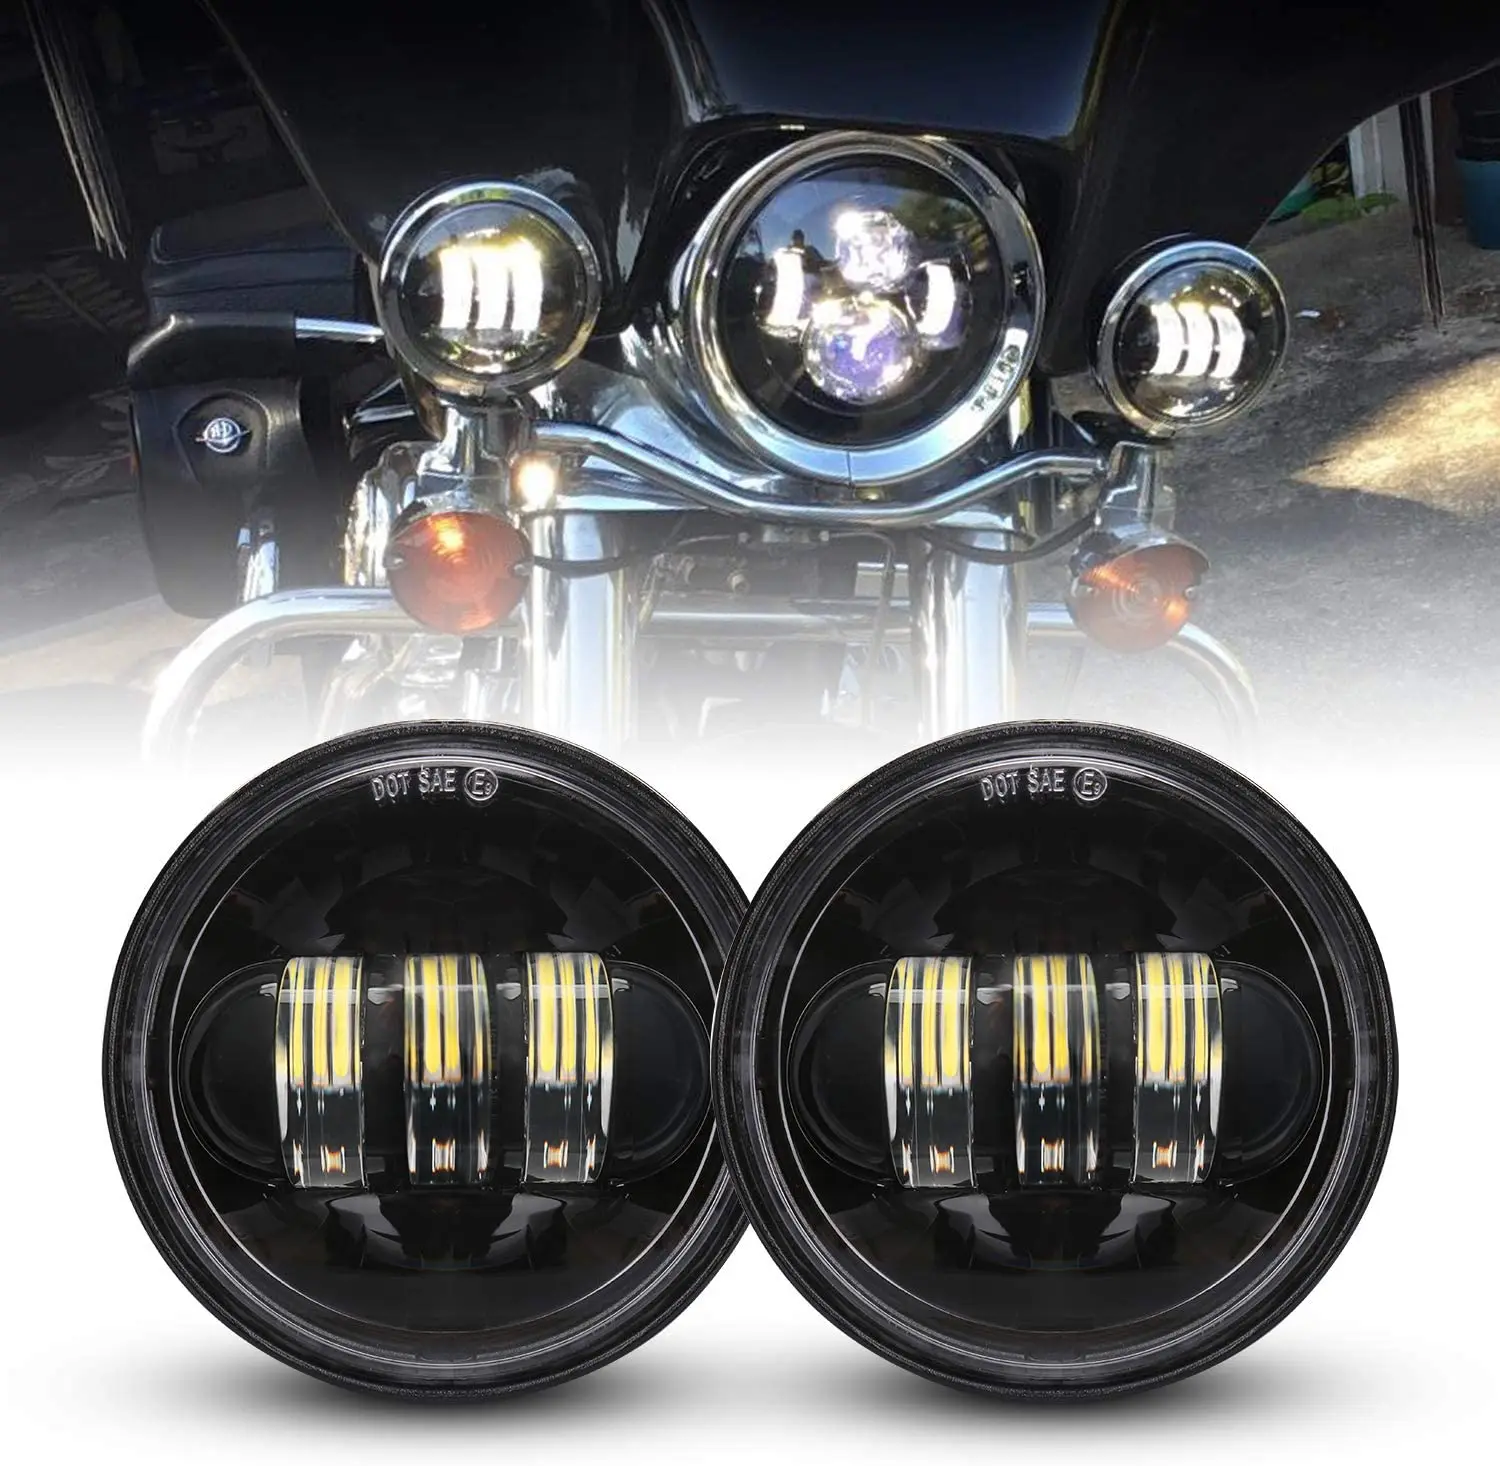 Dot approved 2 PCS 4.5 Inch Cree LED Passing Light LED Fog Lamps Motorcycle Projector Driving Lamp For Harley Davidson Motor